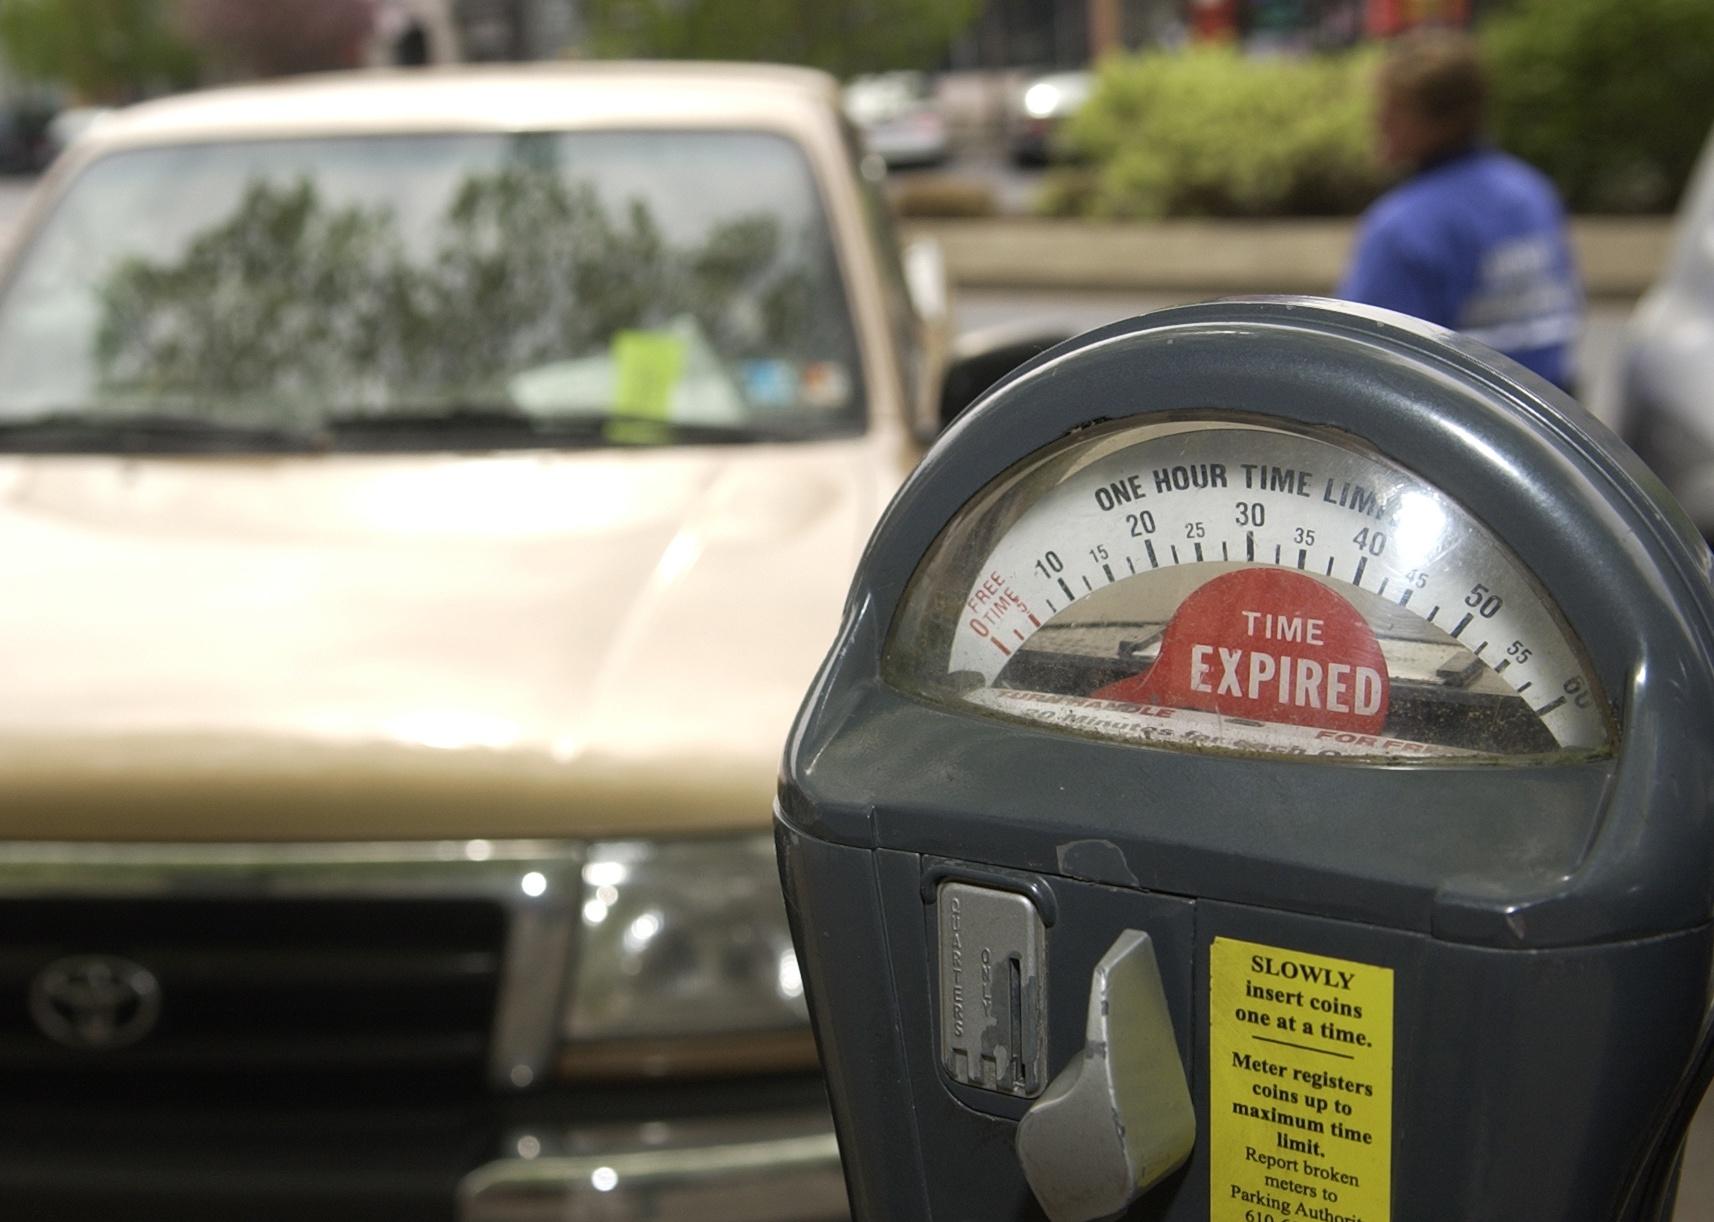 An expired parking meter on the street in front of a truck.